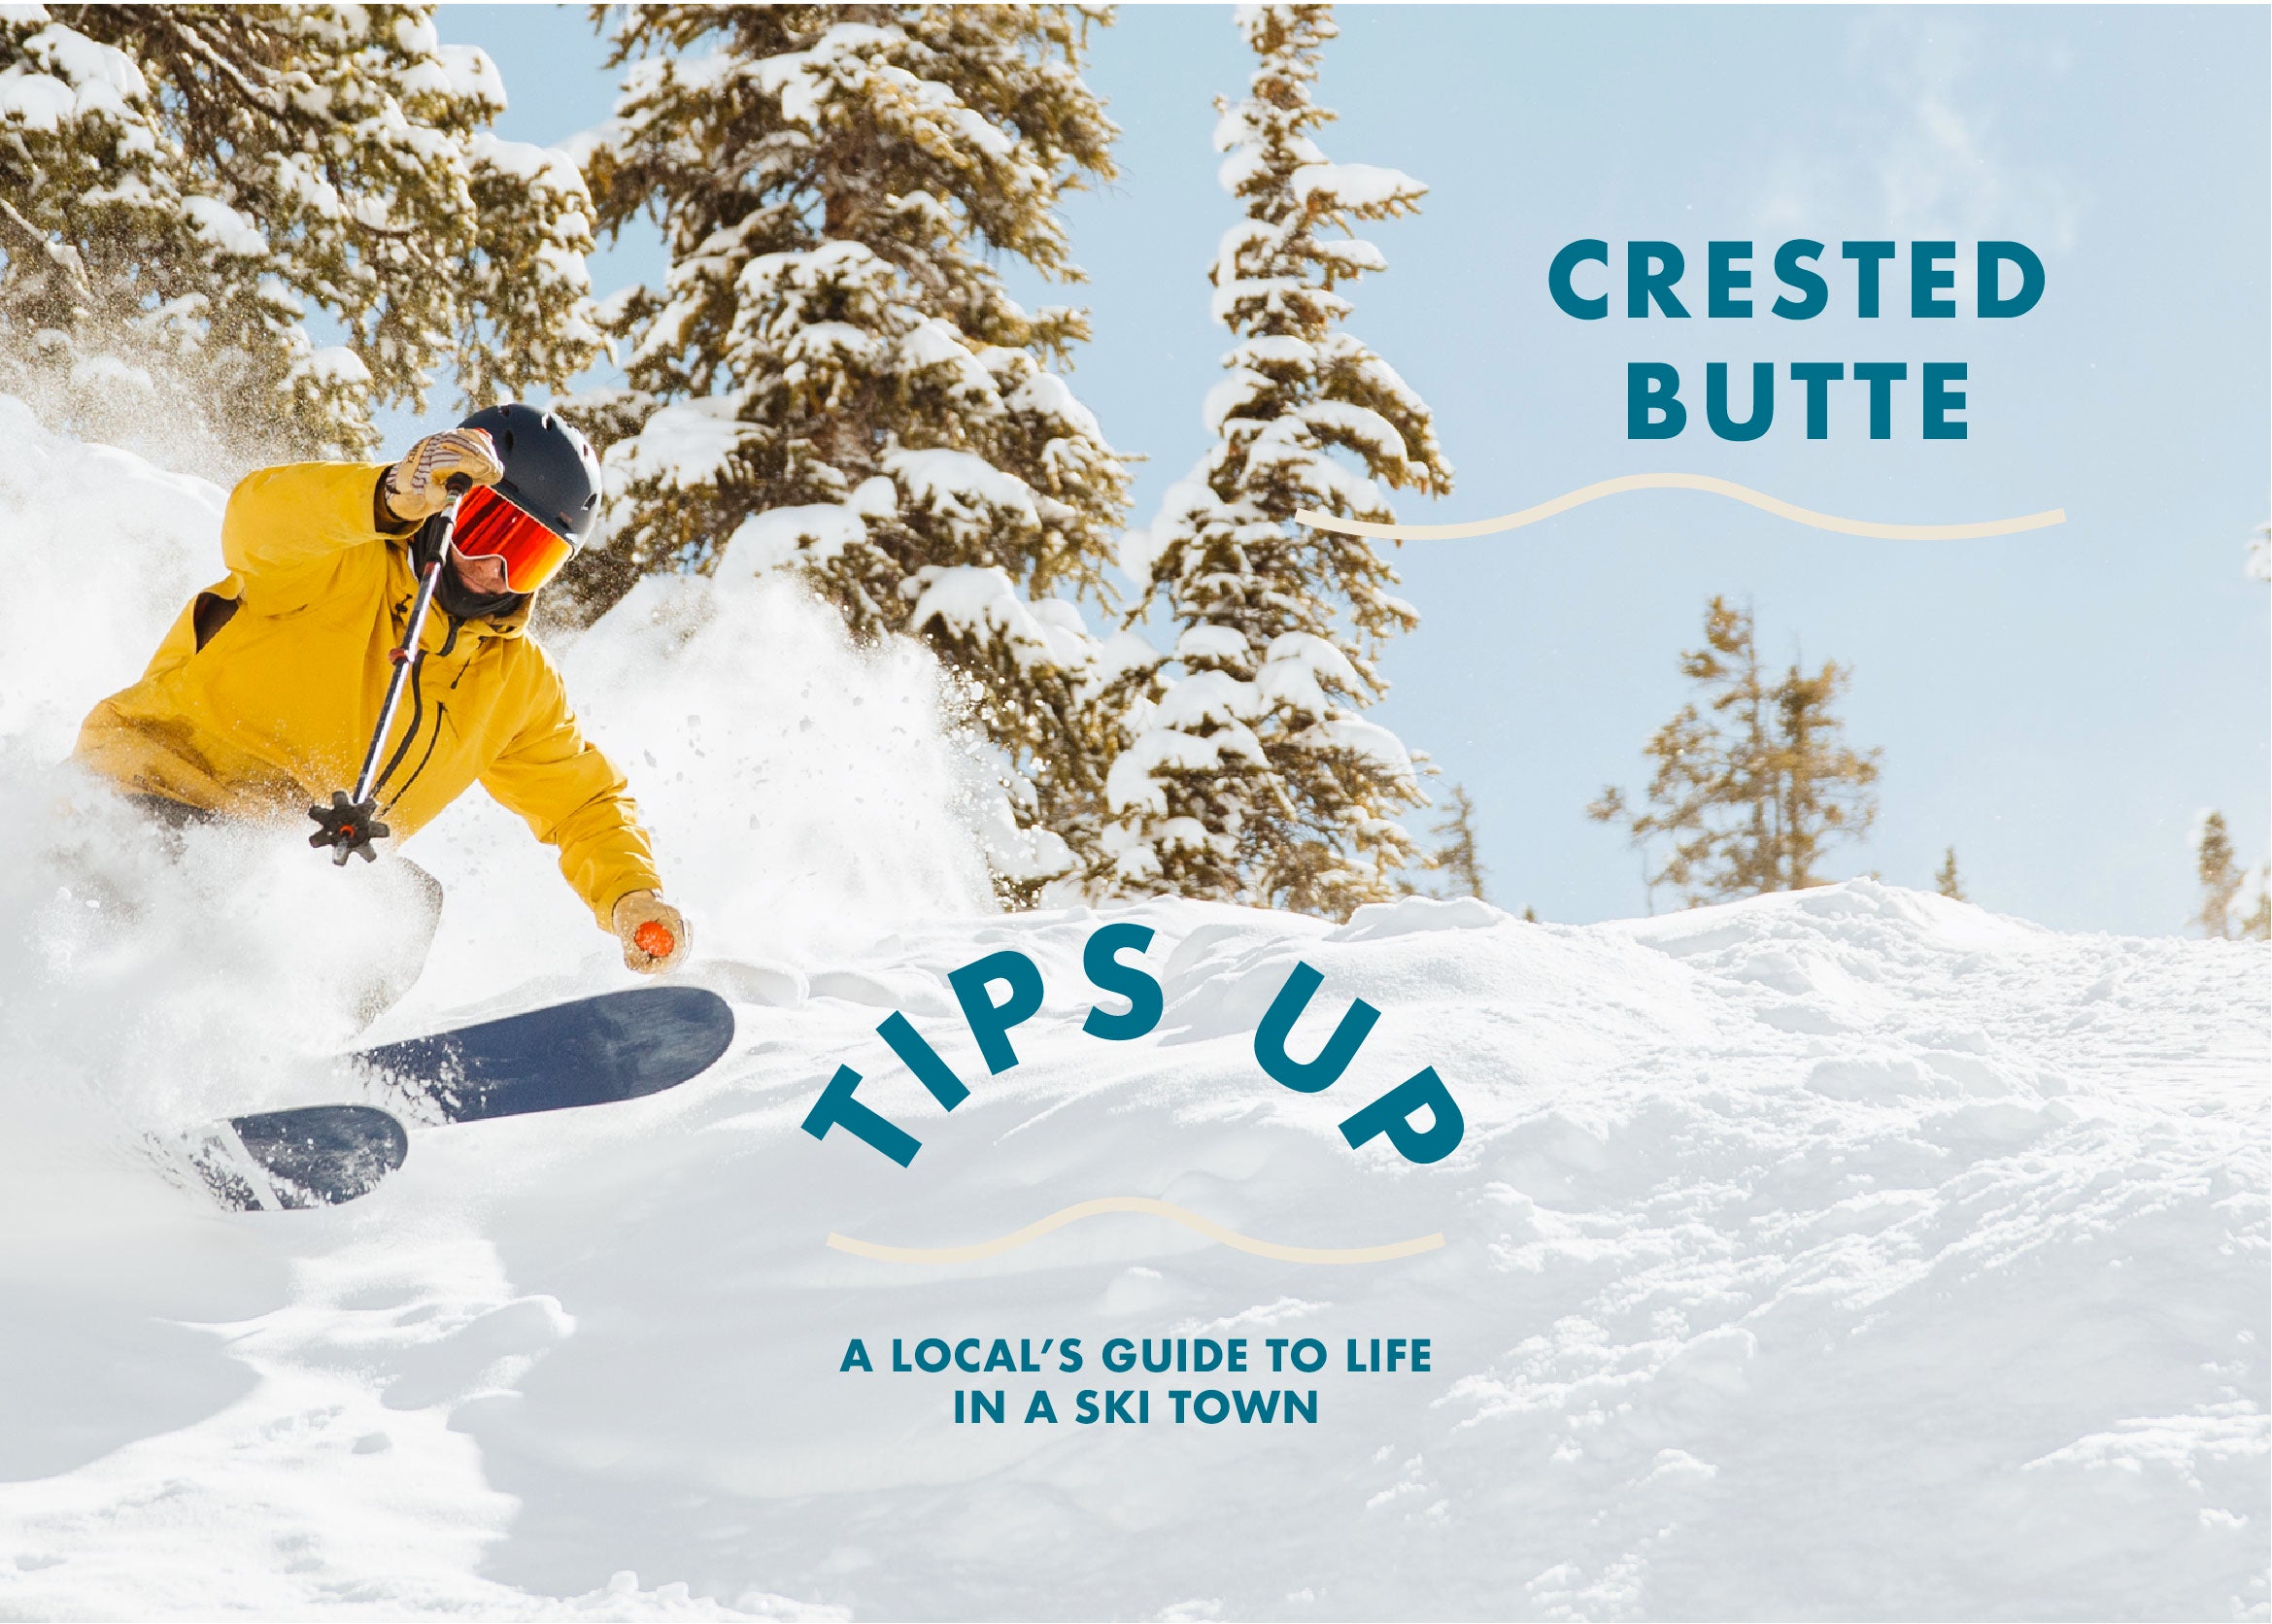 TIPS UP: GLADE TAKES ON CRESTED BUTTE